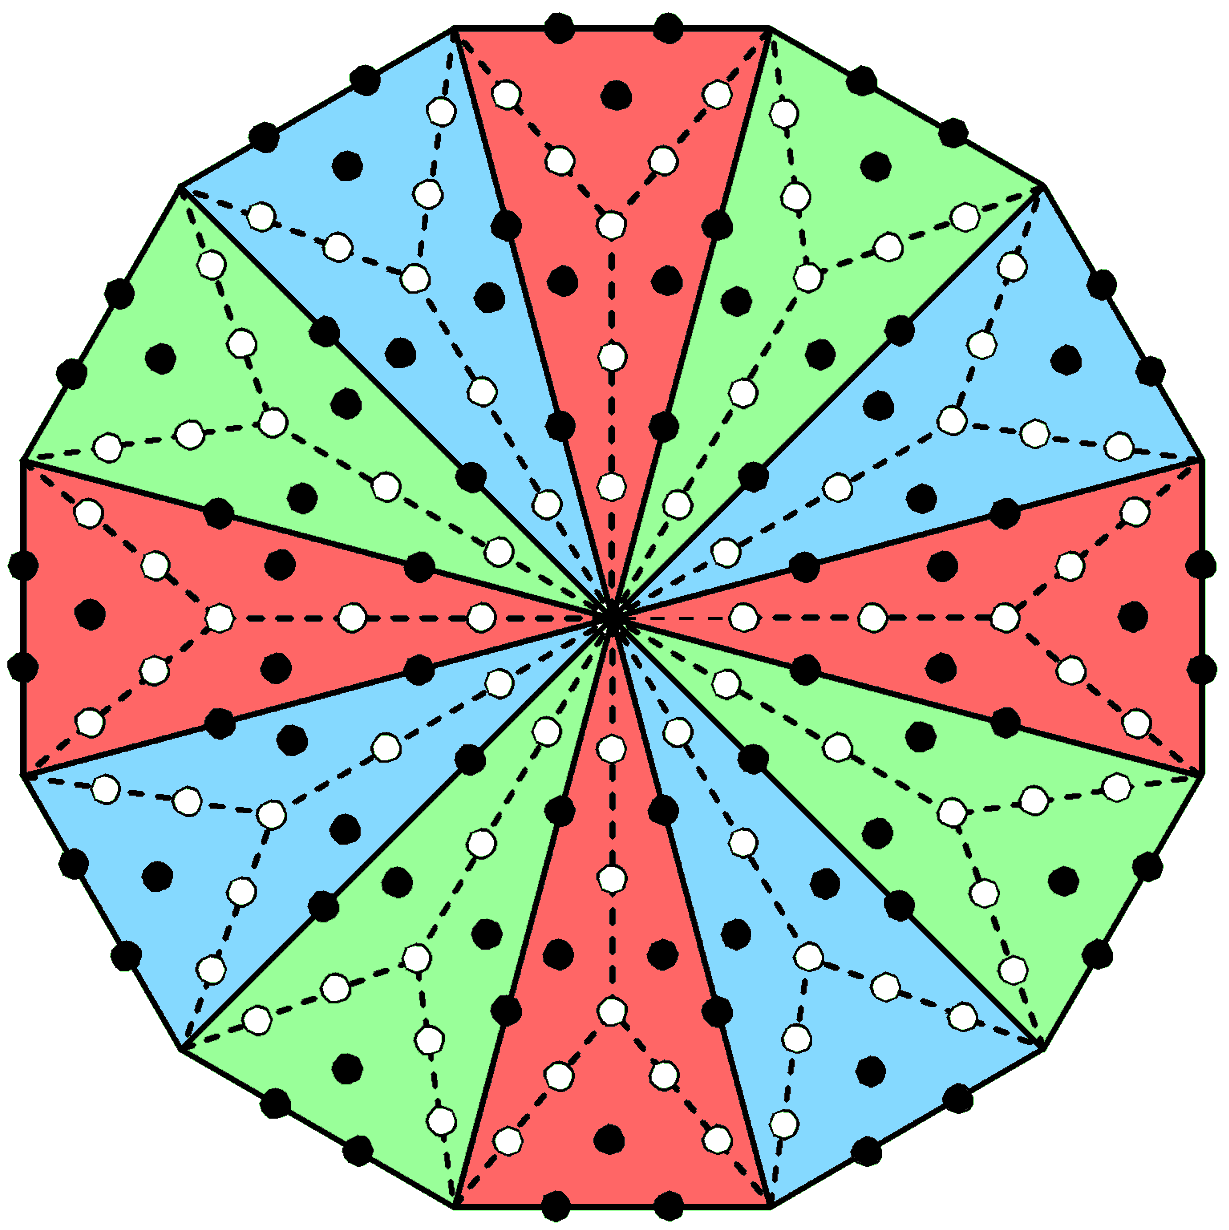 3x56 yods in Type B dodecagon